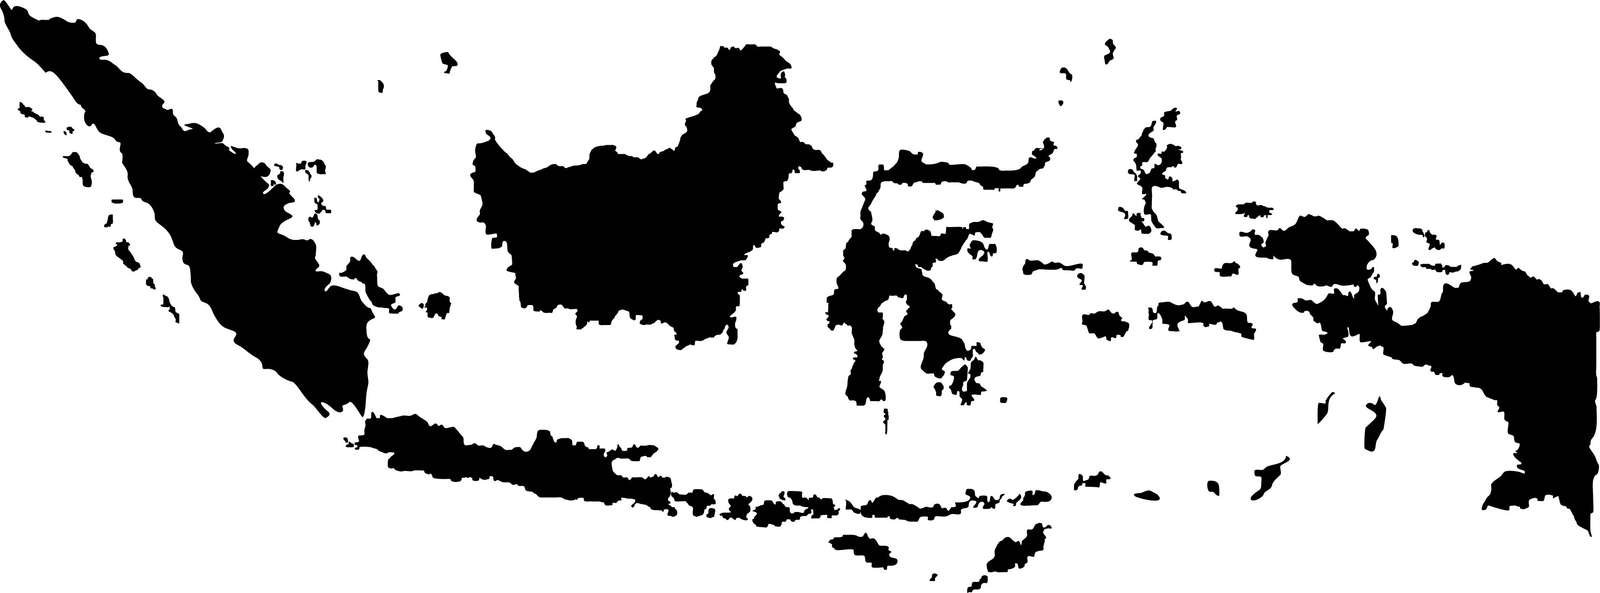 All About Indonesia puzzle online from photo